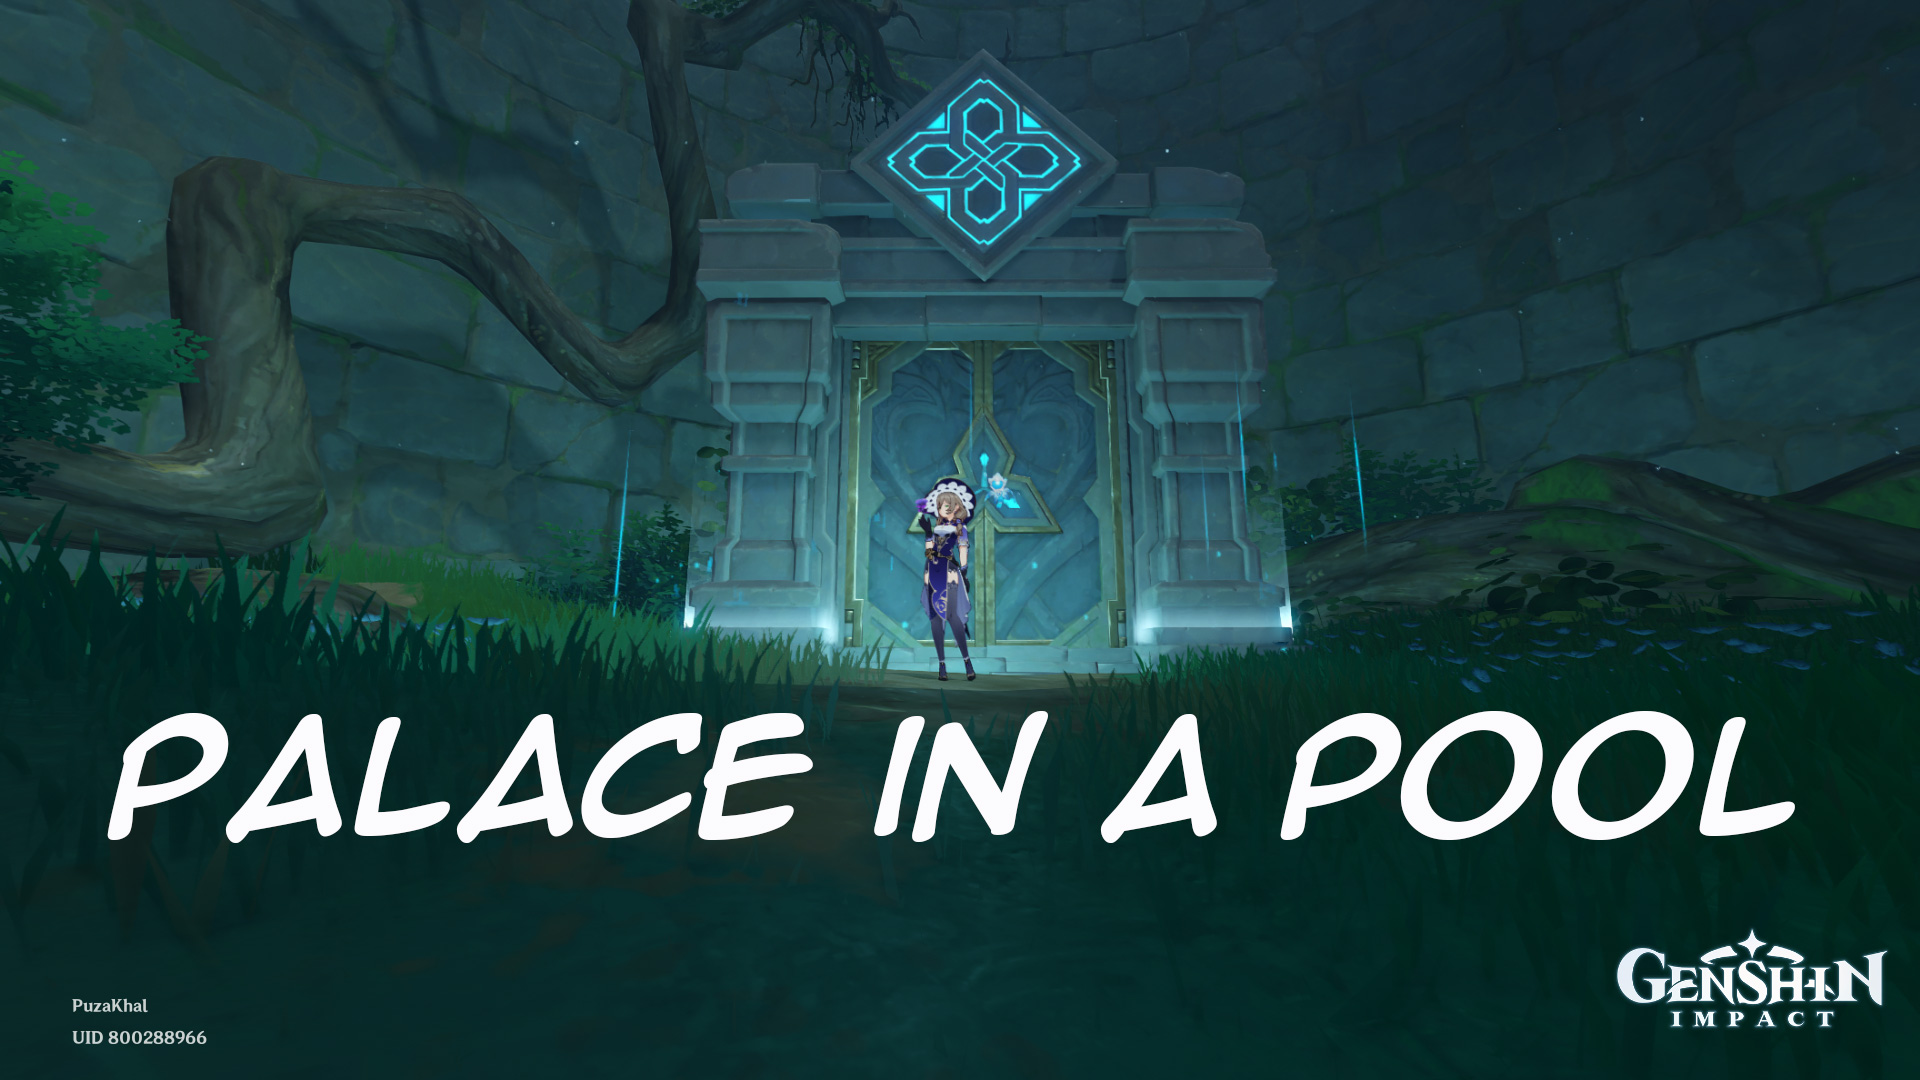 How to Unlock the Palace in a Pool Domain in Genshin Impact